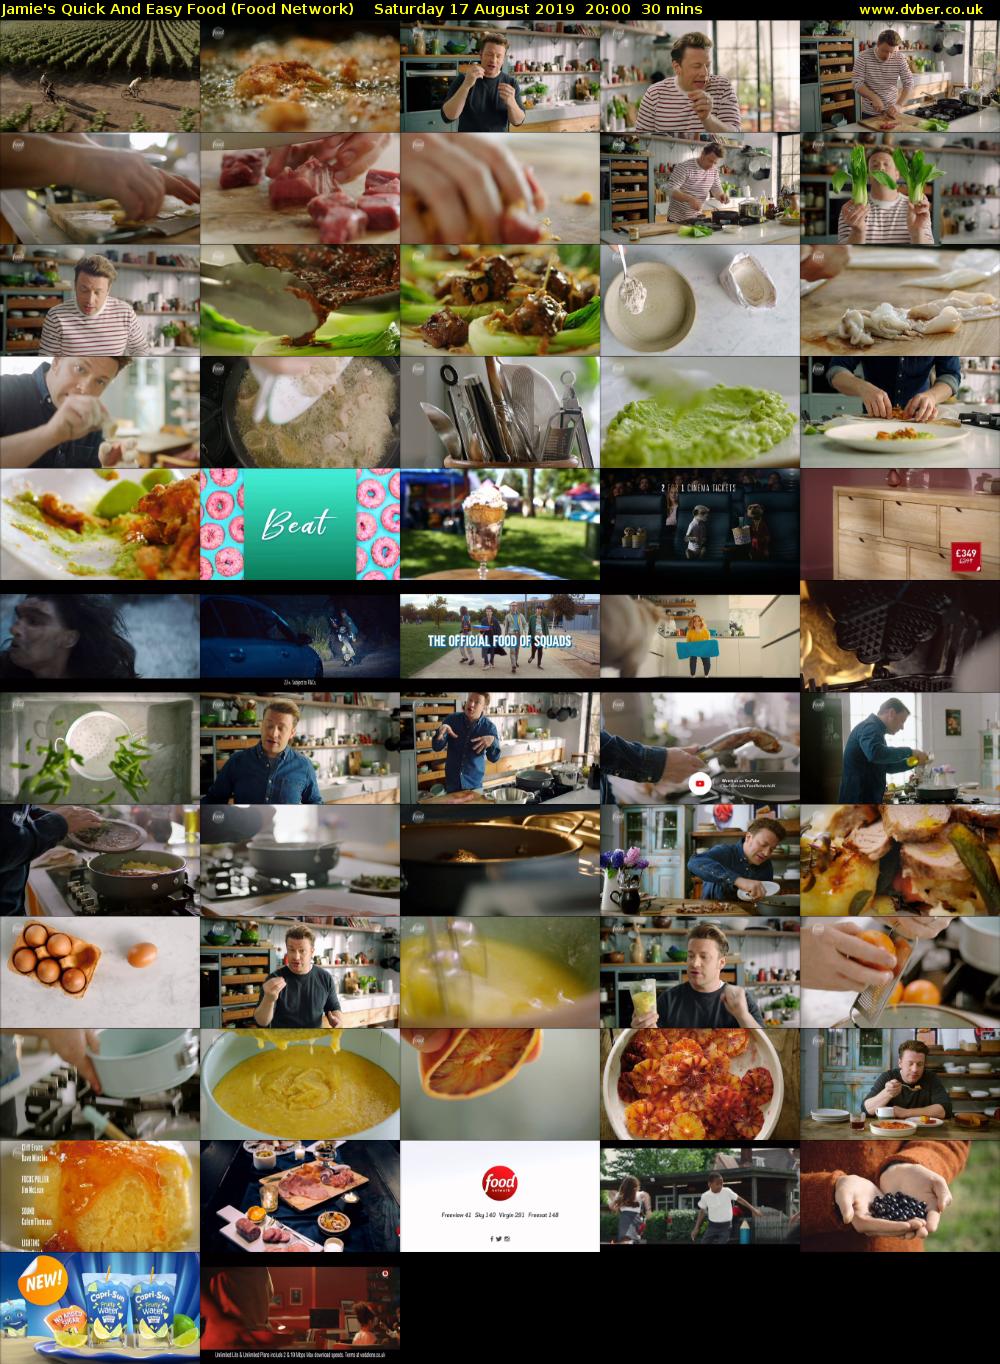 Jamie's Quick And Easy Food (Food Network) Saturday 17 August 2019 20:00 - 20:30